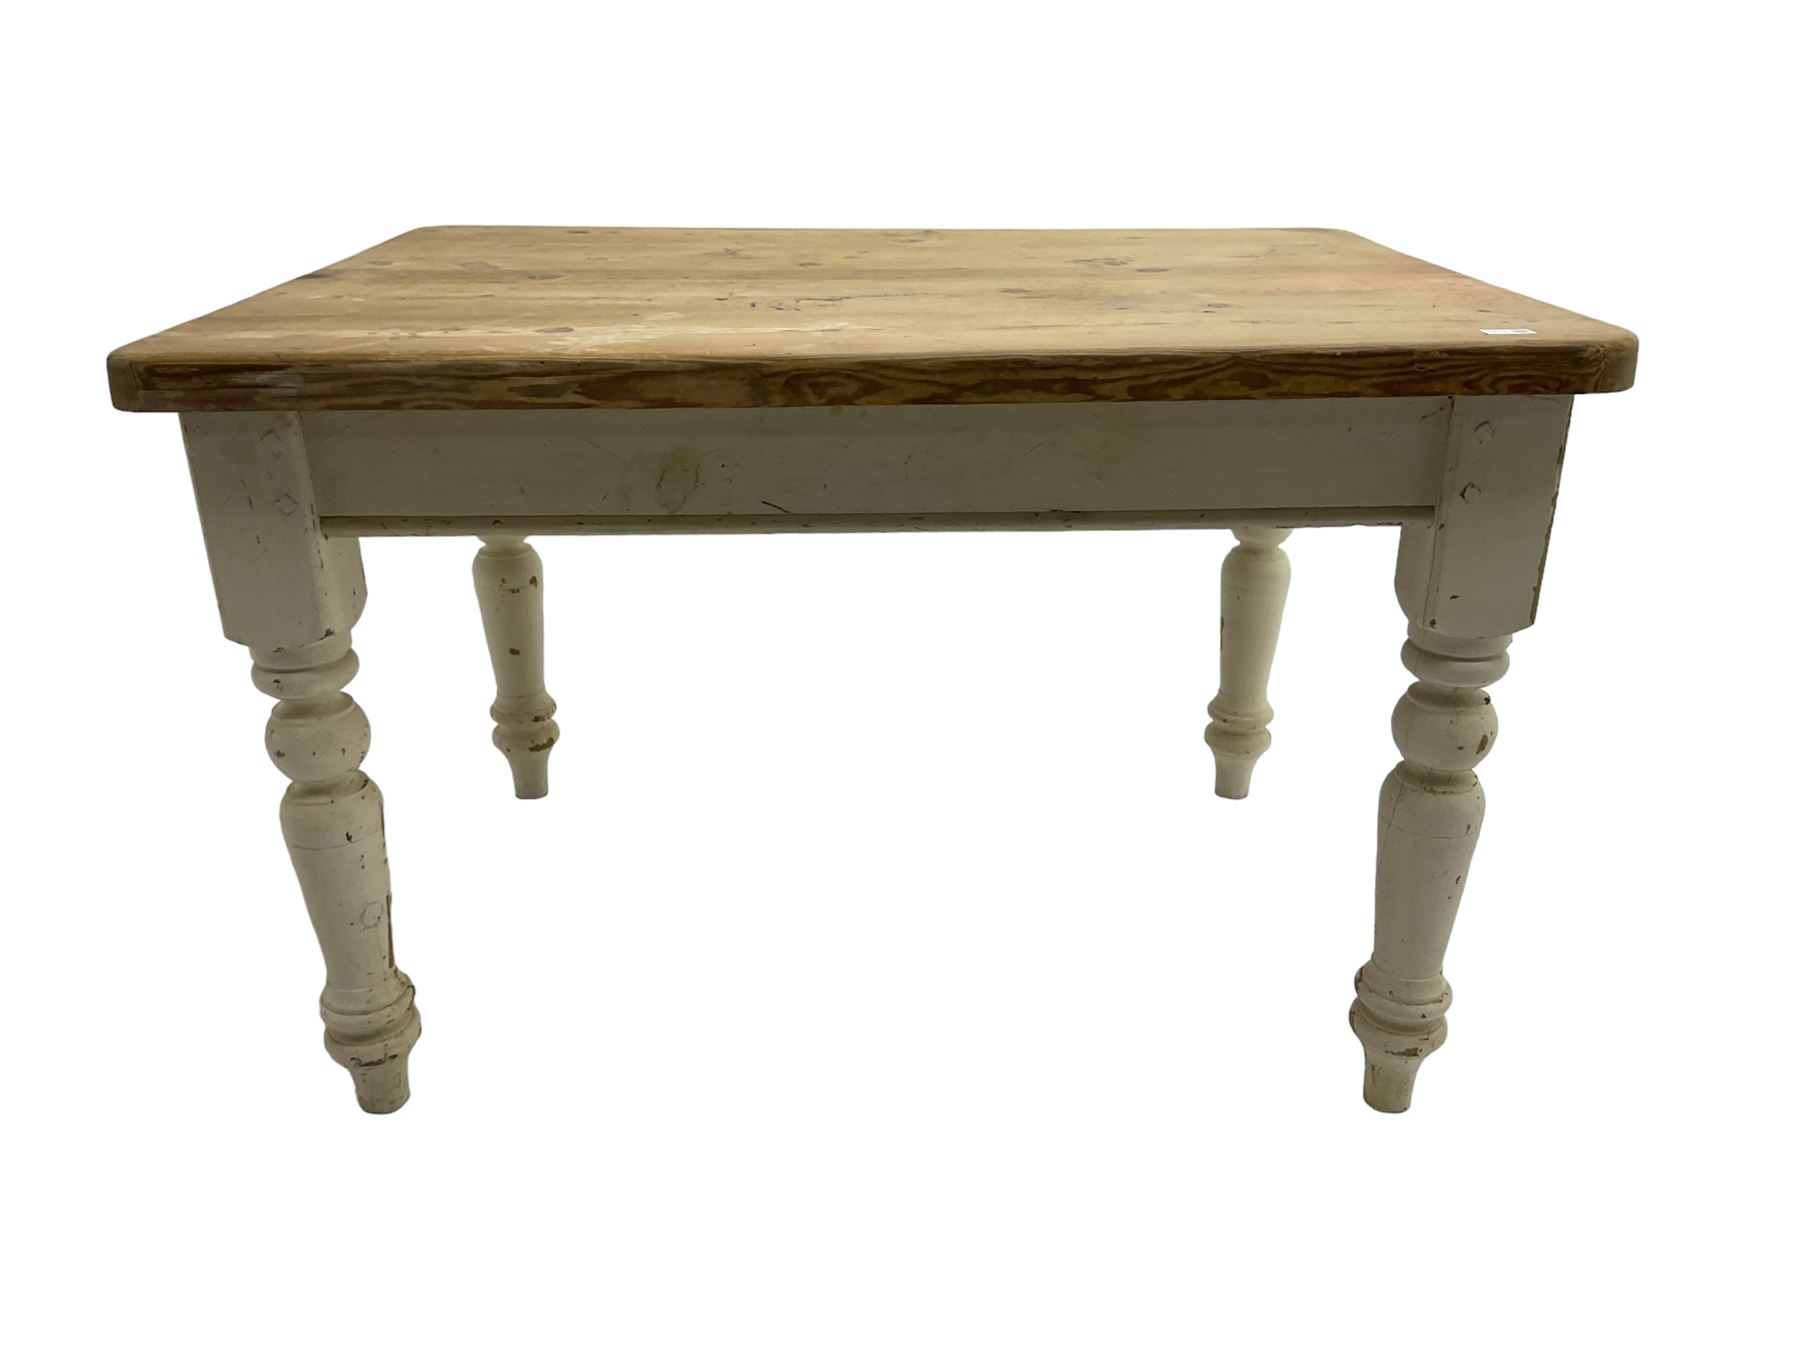 Traditional pine kitchen table with white painted base - Image 6 of 7